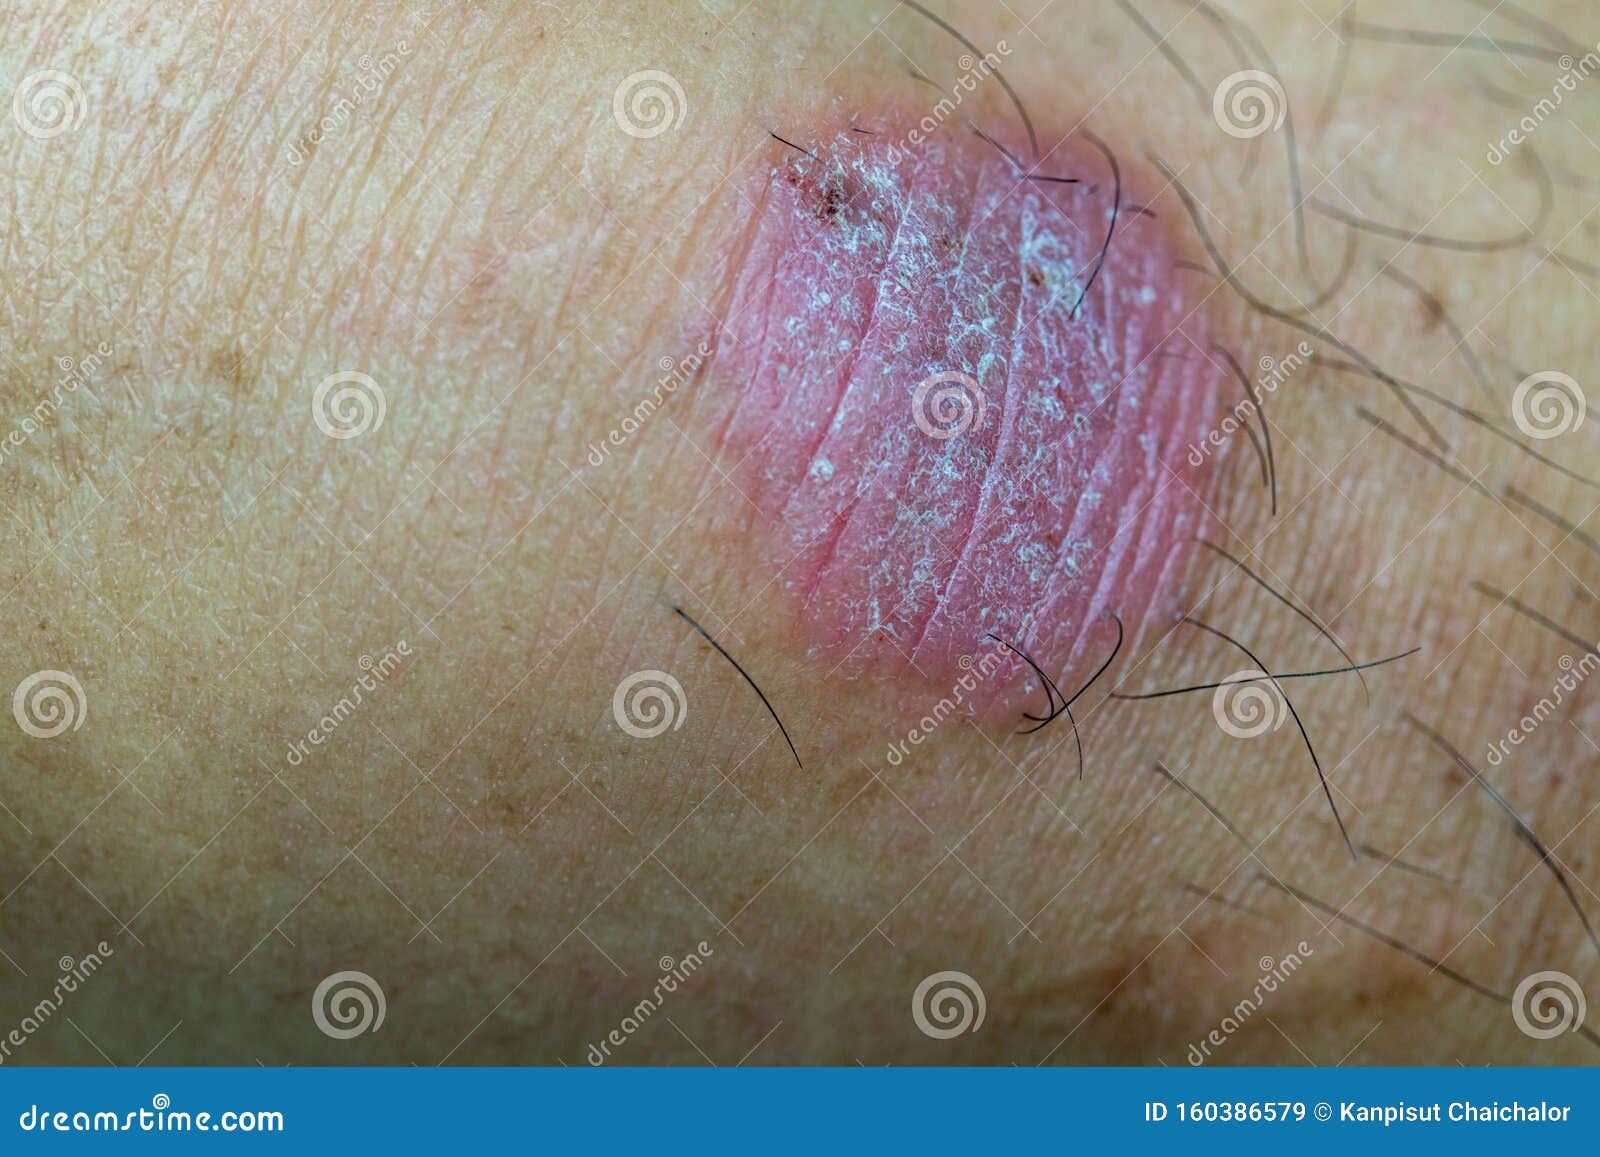 Ring Worm Infection, Dermatophytosis on Skin. Ringworm Infection or Tinea  on Skin. Mycosis Infection on the Human Skin Stock Image - Image of  allergic, injury: 160386579